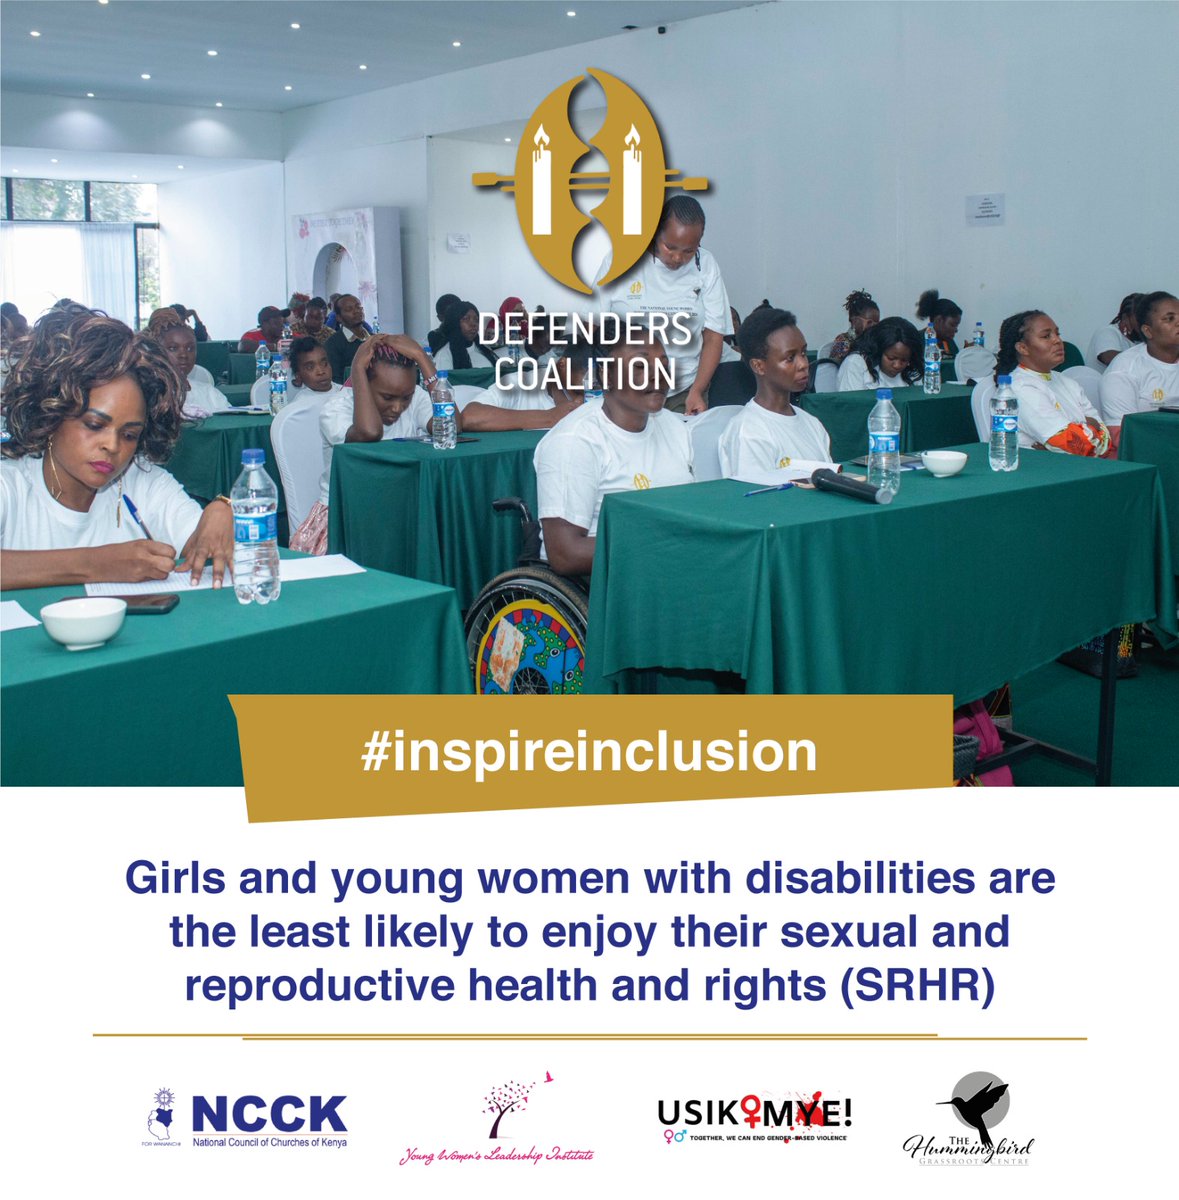 Persons with Disability sexual reproductive health rights also matters lets break barriers that hinder person with disability access services @Badili_A
@rhnkorg  @THGCenterKe
@wanjaah @defenderske
@ncckkenya
@ywli_info
@usikimye
#inspireinclusion